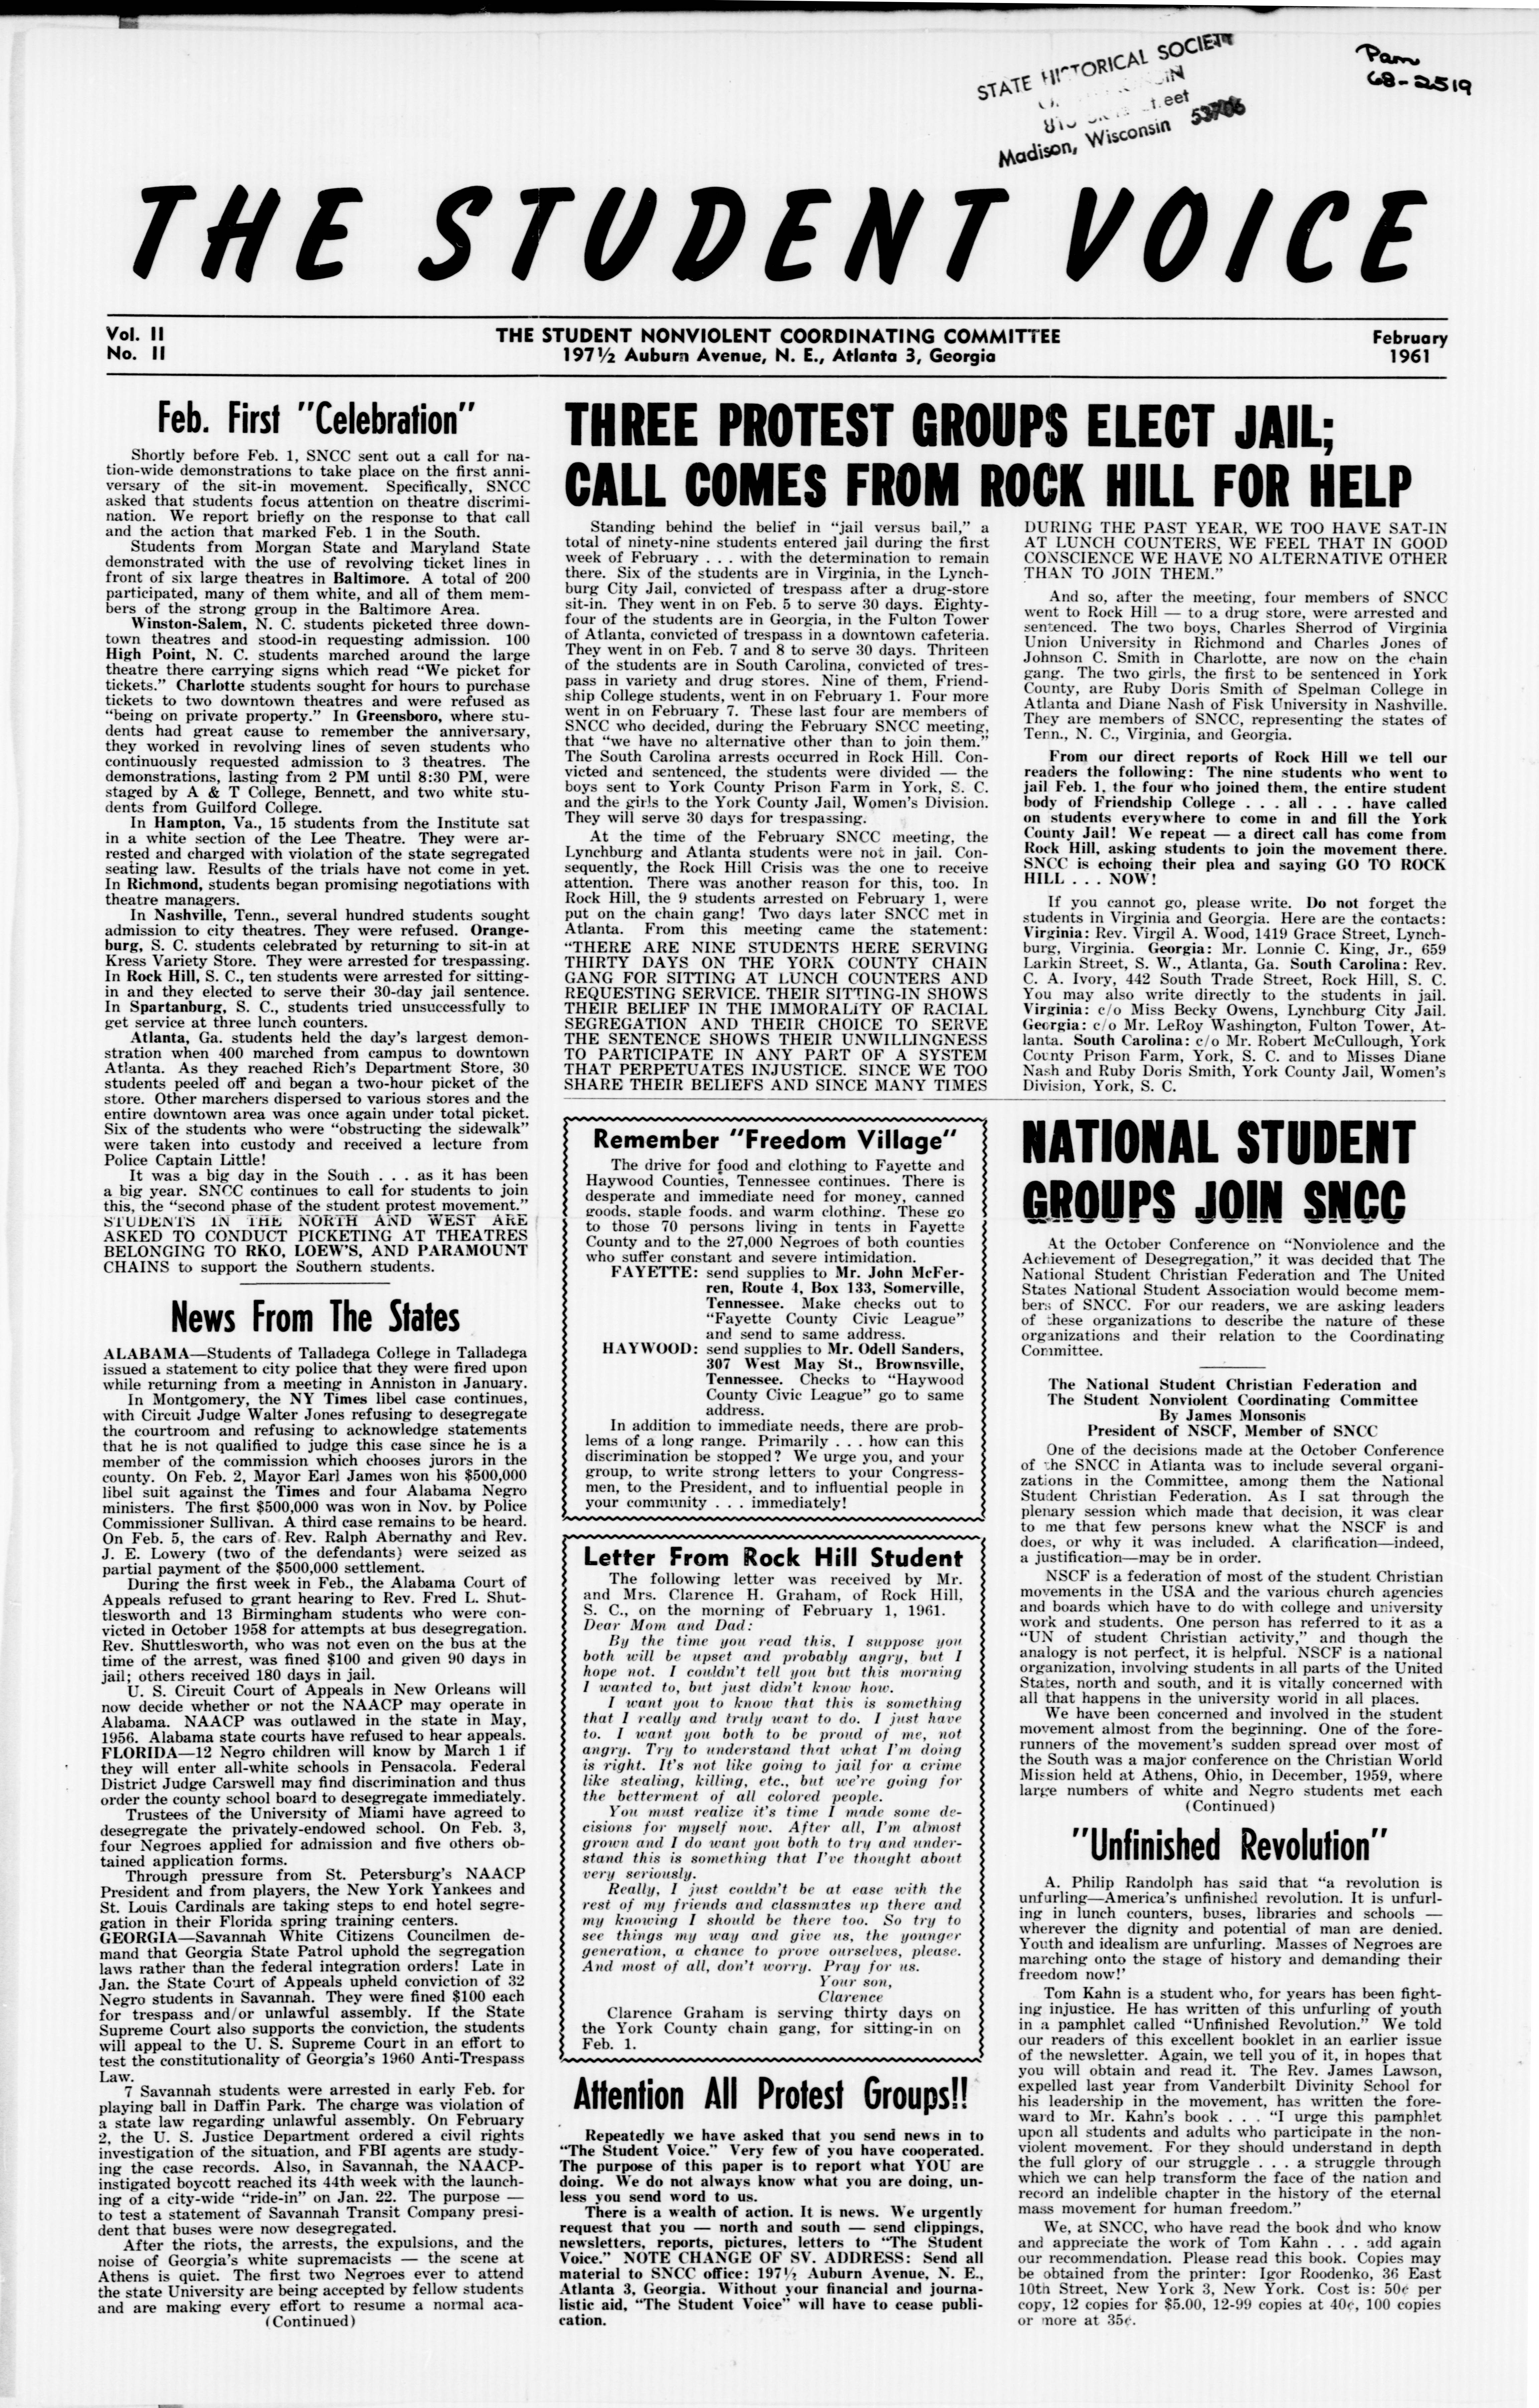 A photograph of the front of a newspaper, titled “THE STUDENT VOICE.”